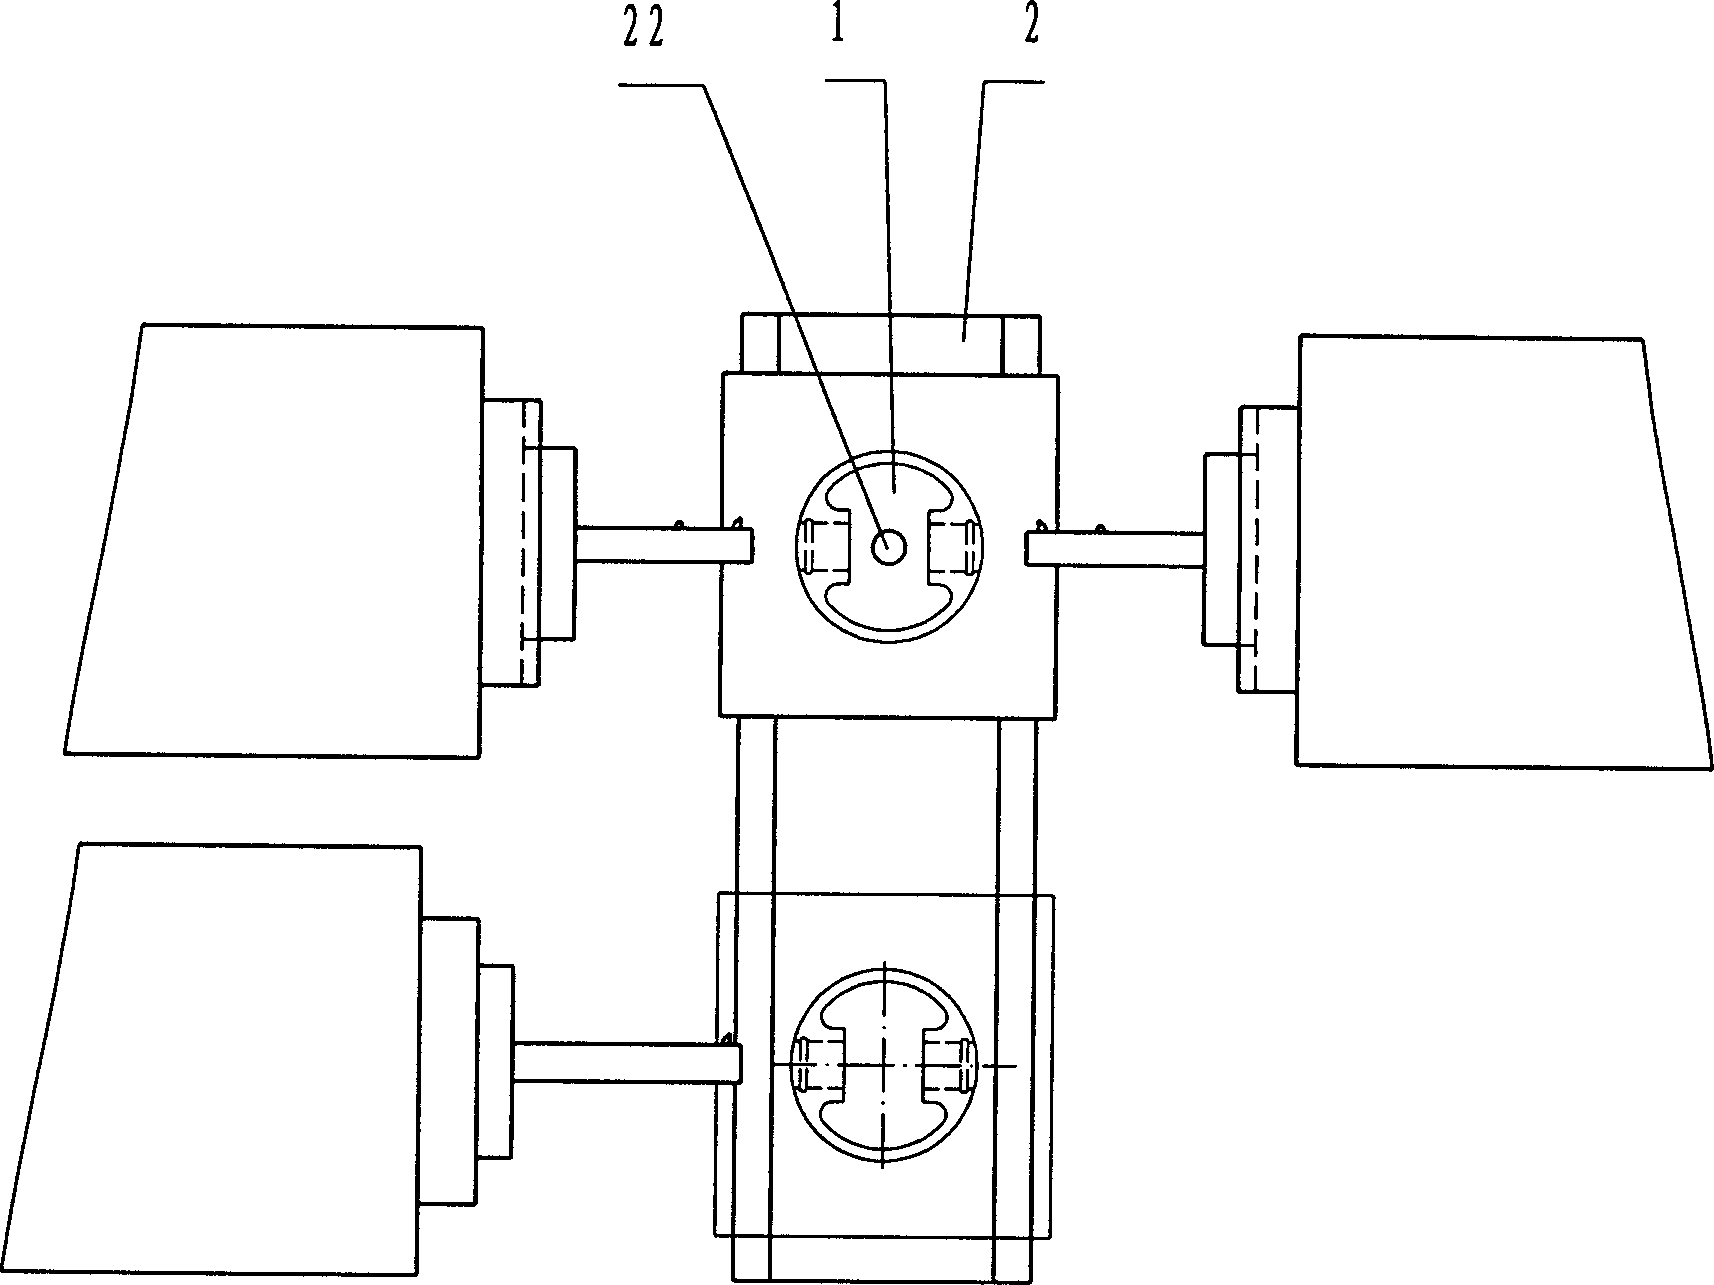 Positioning and clamping method for processing piston and processing technique